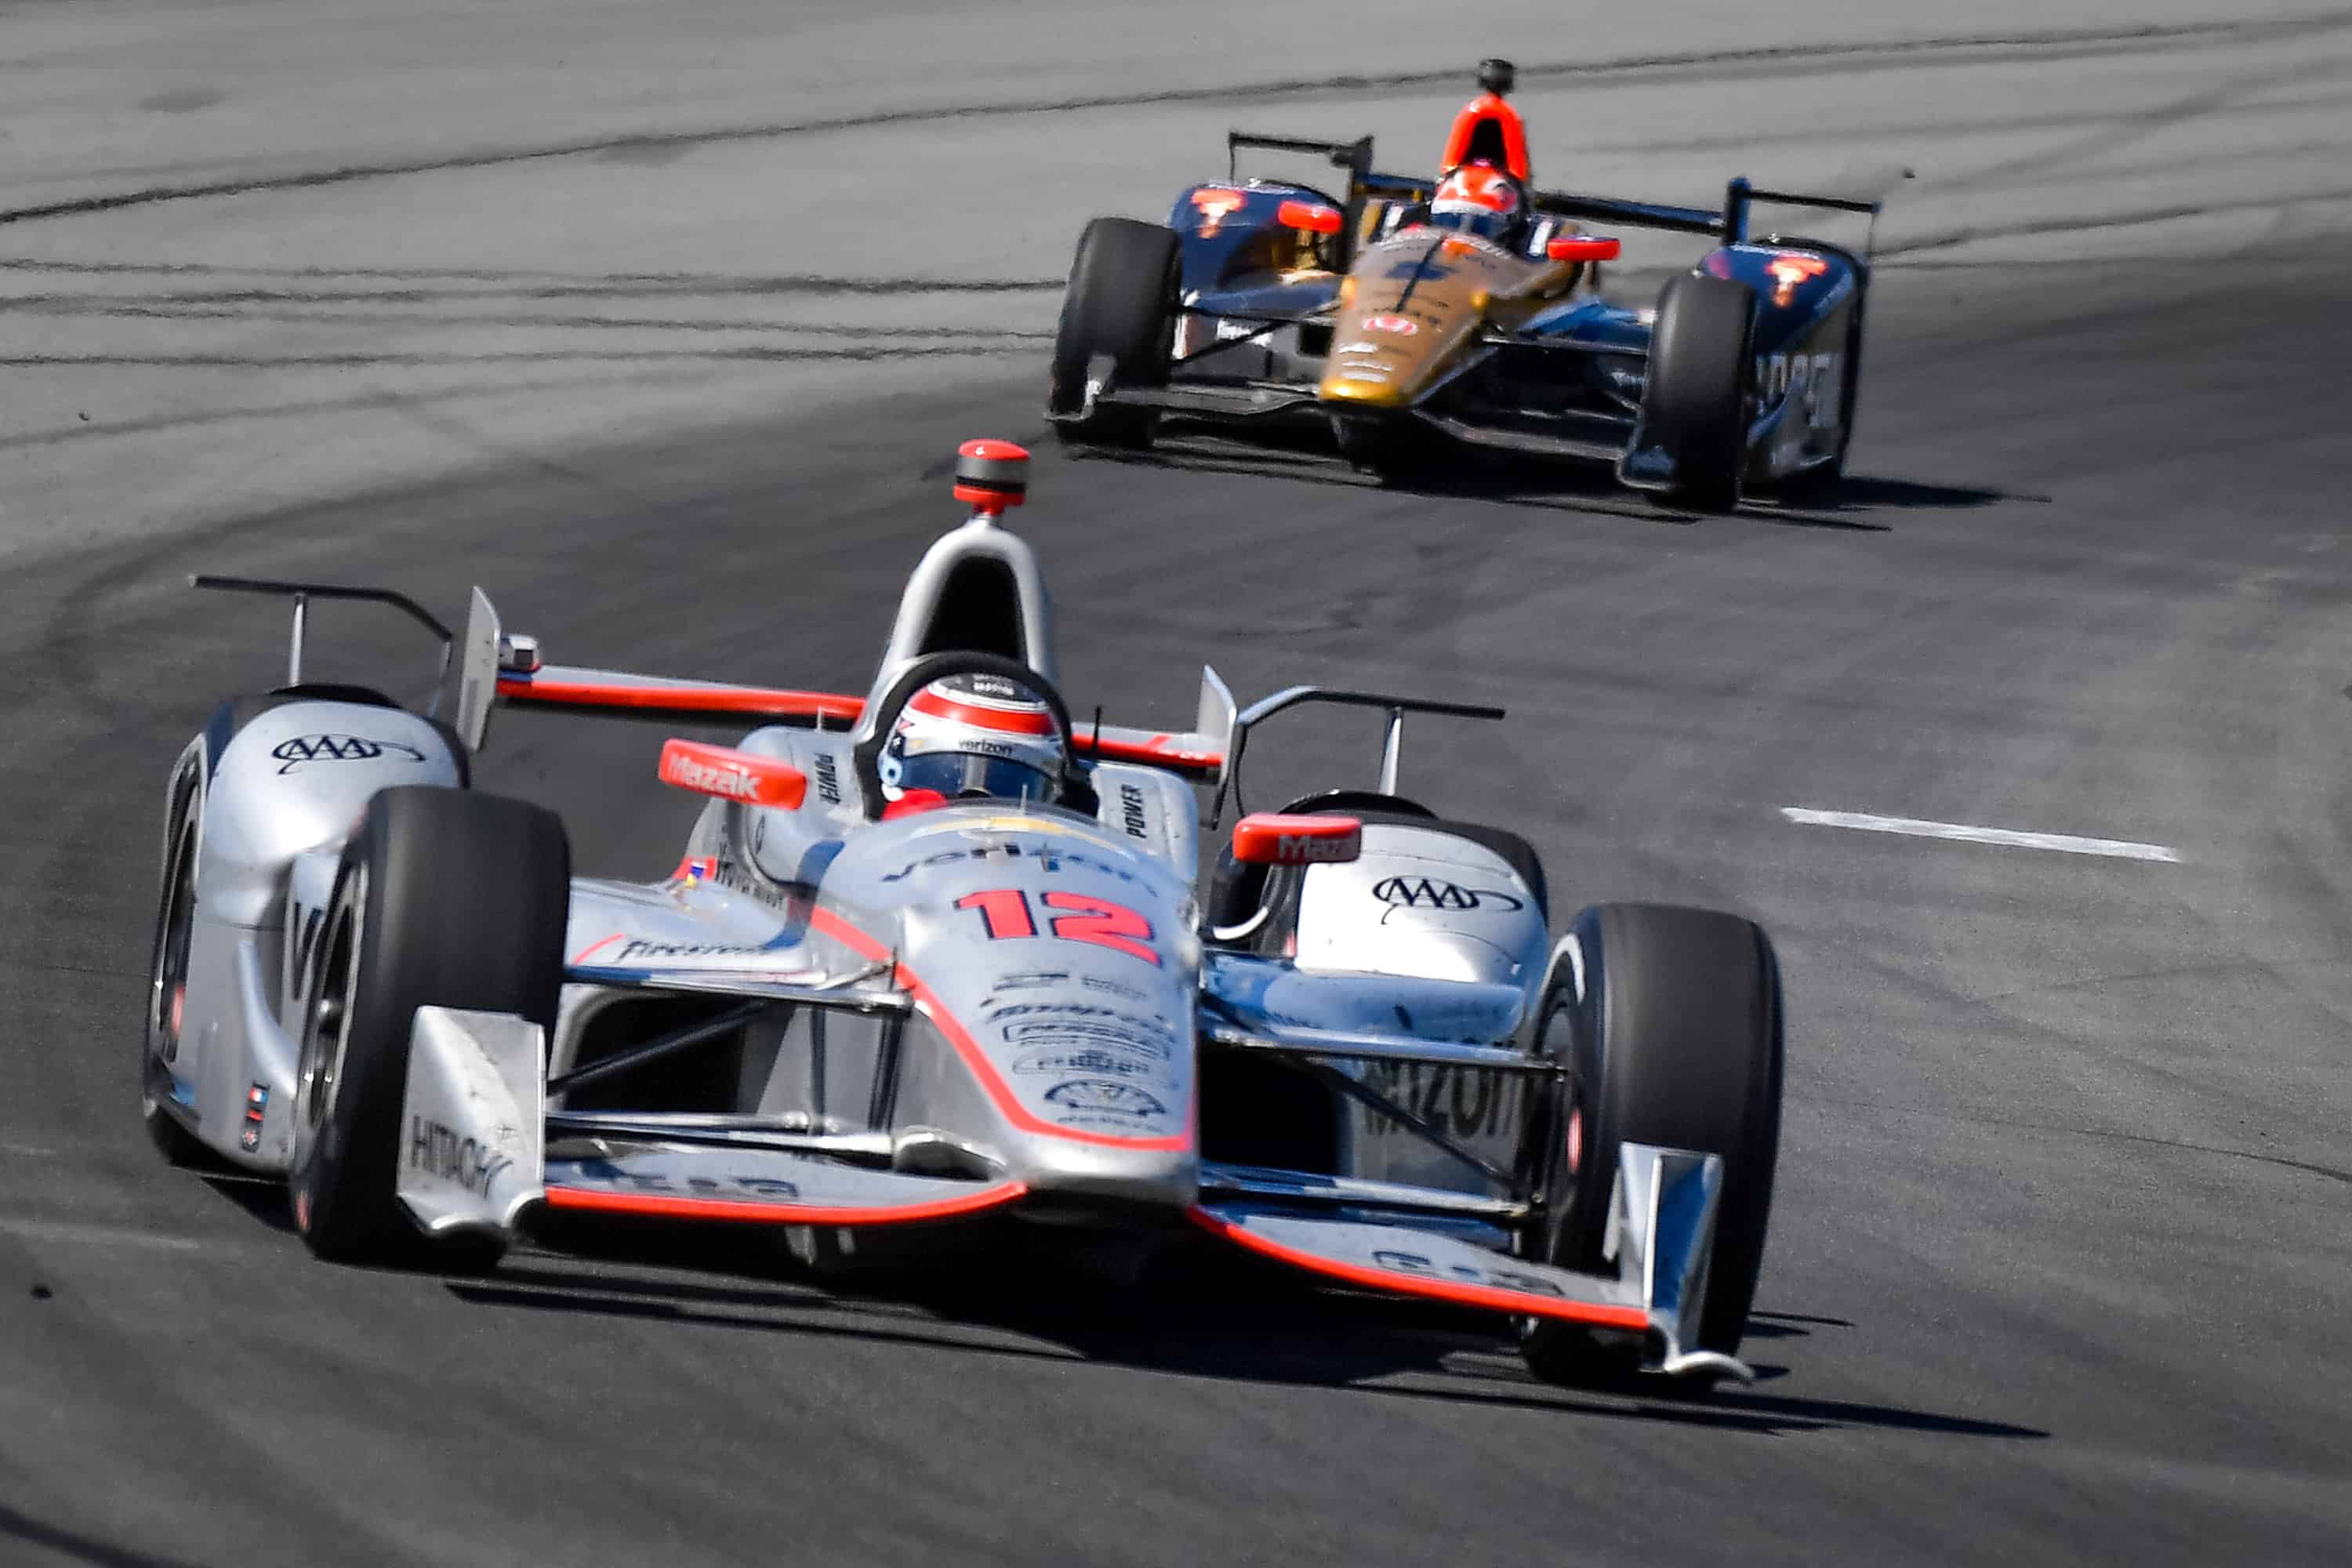 the Chevolet Indycar V6 engine is developed by Ilmor